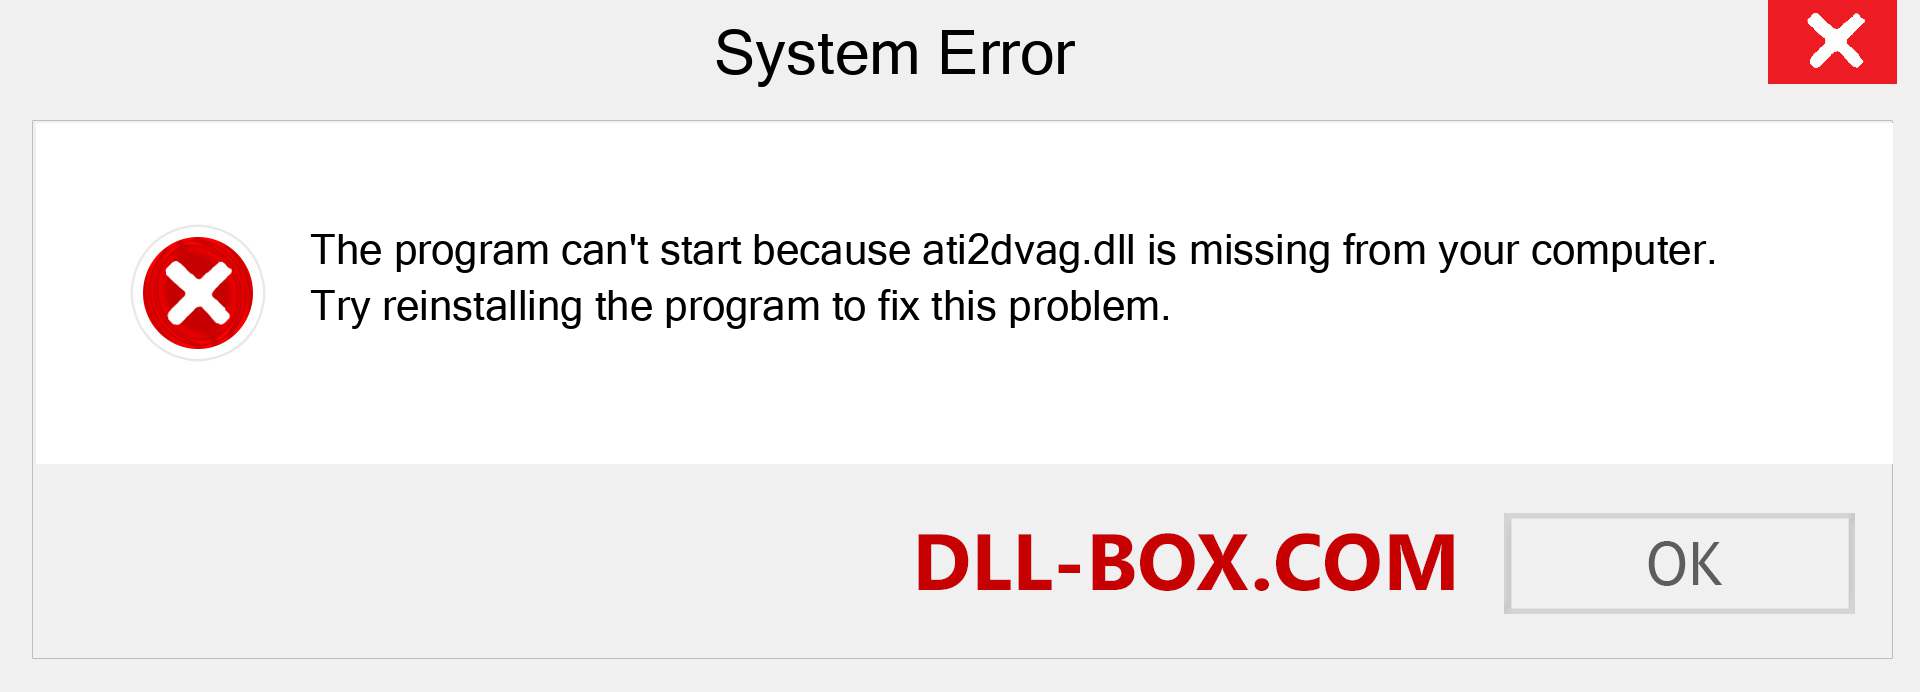  ati2dvag.dll file is missing?. Download for Windows 7, 8, 10 - Fix  ati2dvag dll Missing Error on Windows, photos, images